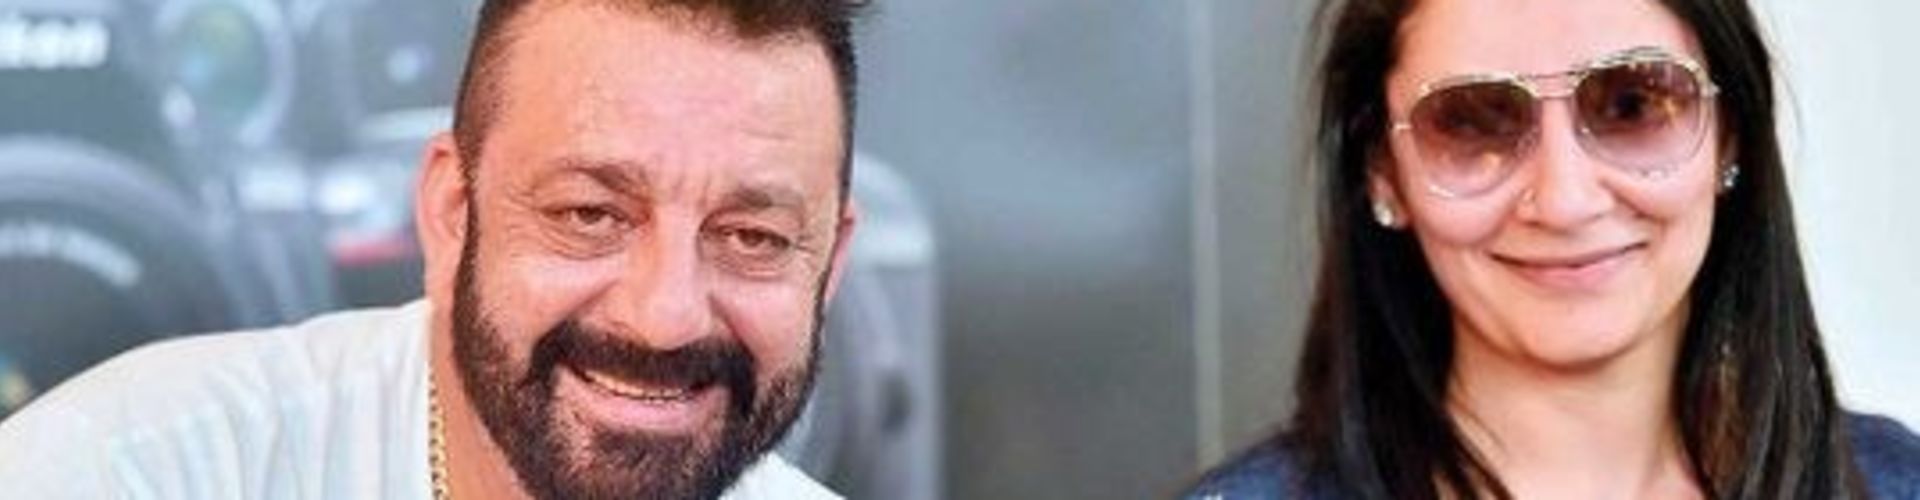 Sanjay Dutt to have initial treatment in Mumbai; wife Maanayata issues statement